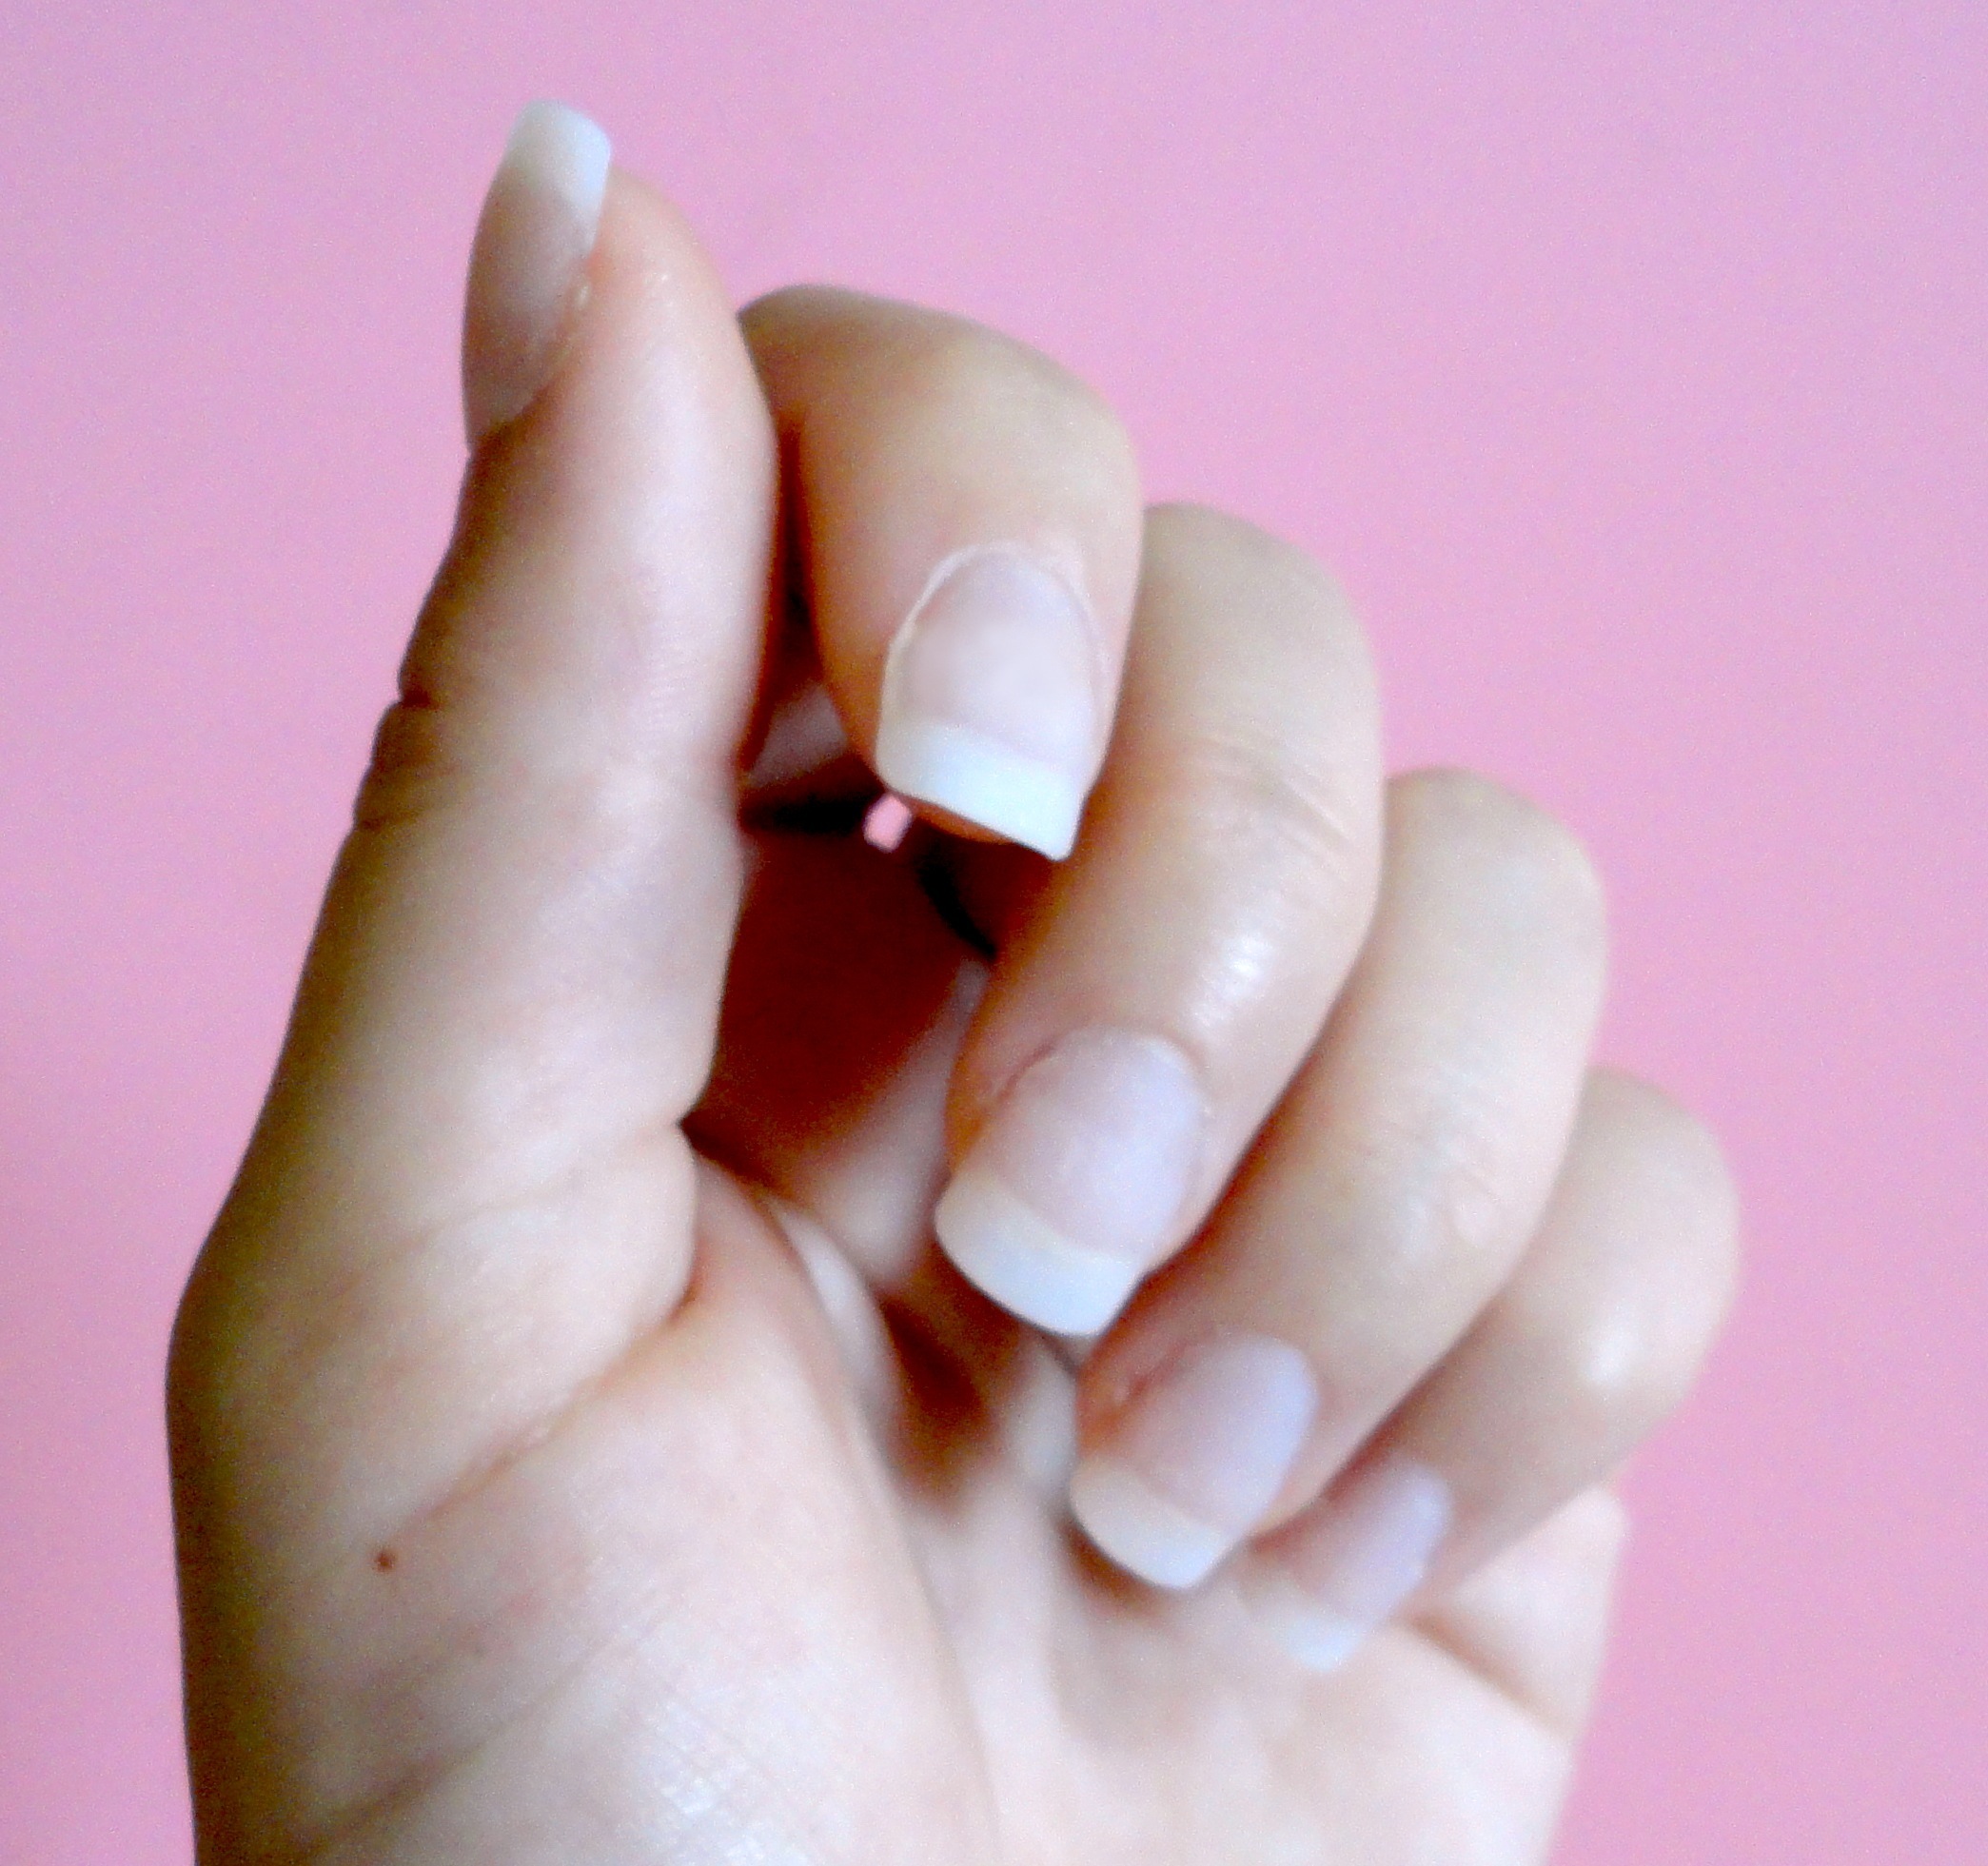 Do it yourself: Apply your own acrylic nail tips (cheaply!)